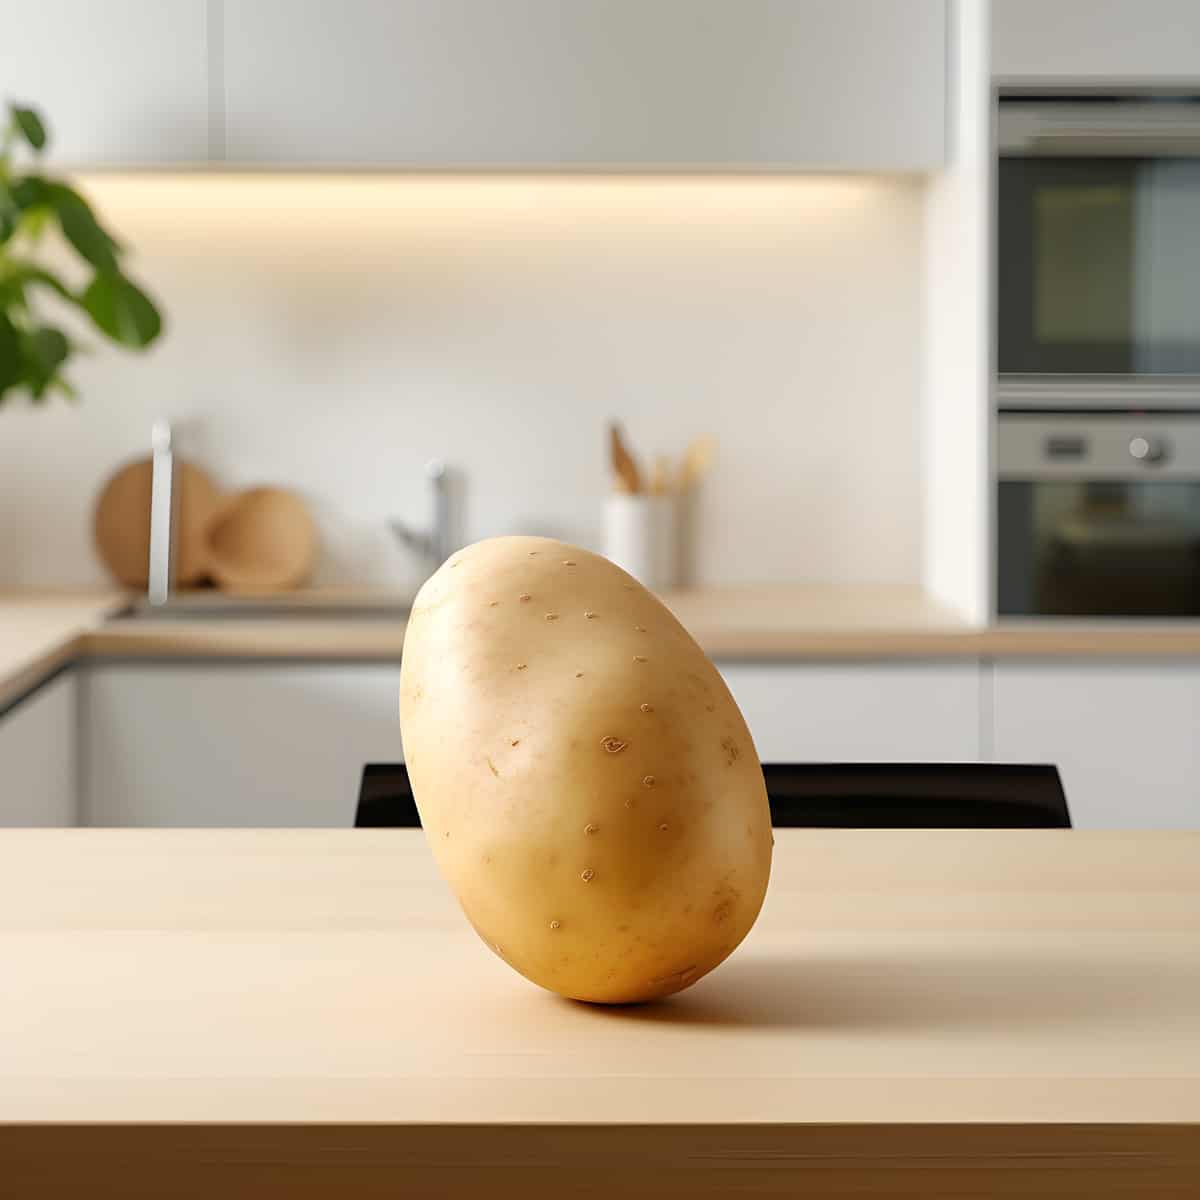 Hermes Potatoes on a kitchen counter